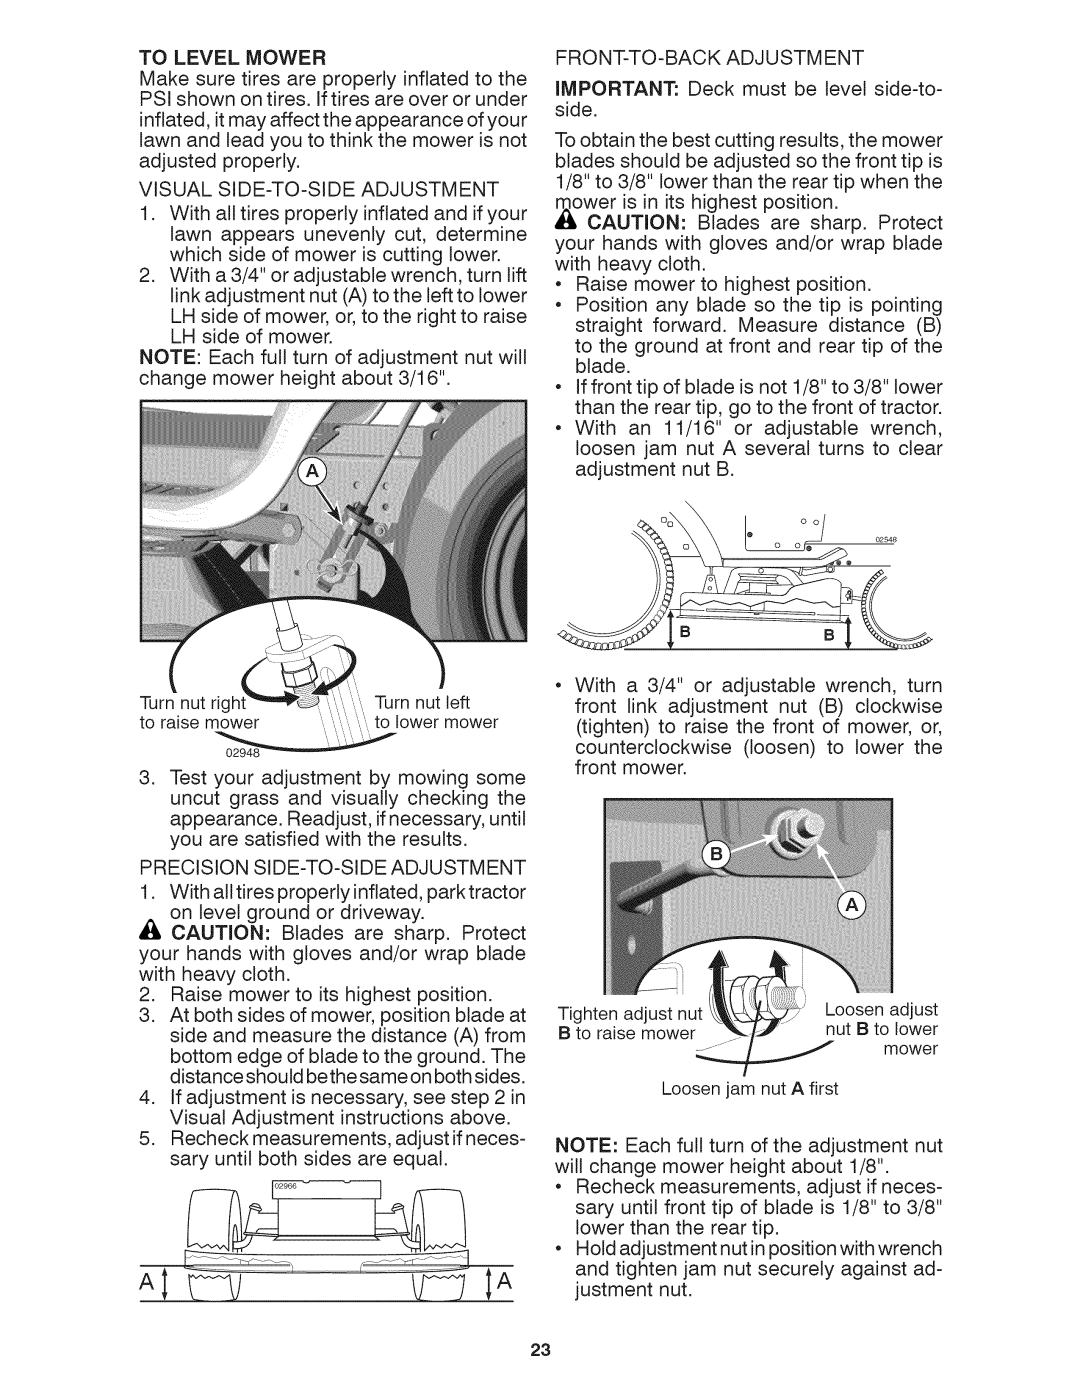 Craftsman 917.28035 owner manual To Level Mower, IMPORTANT: Deck must be level side-to-side, J 